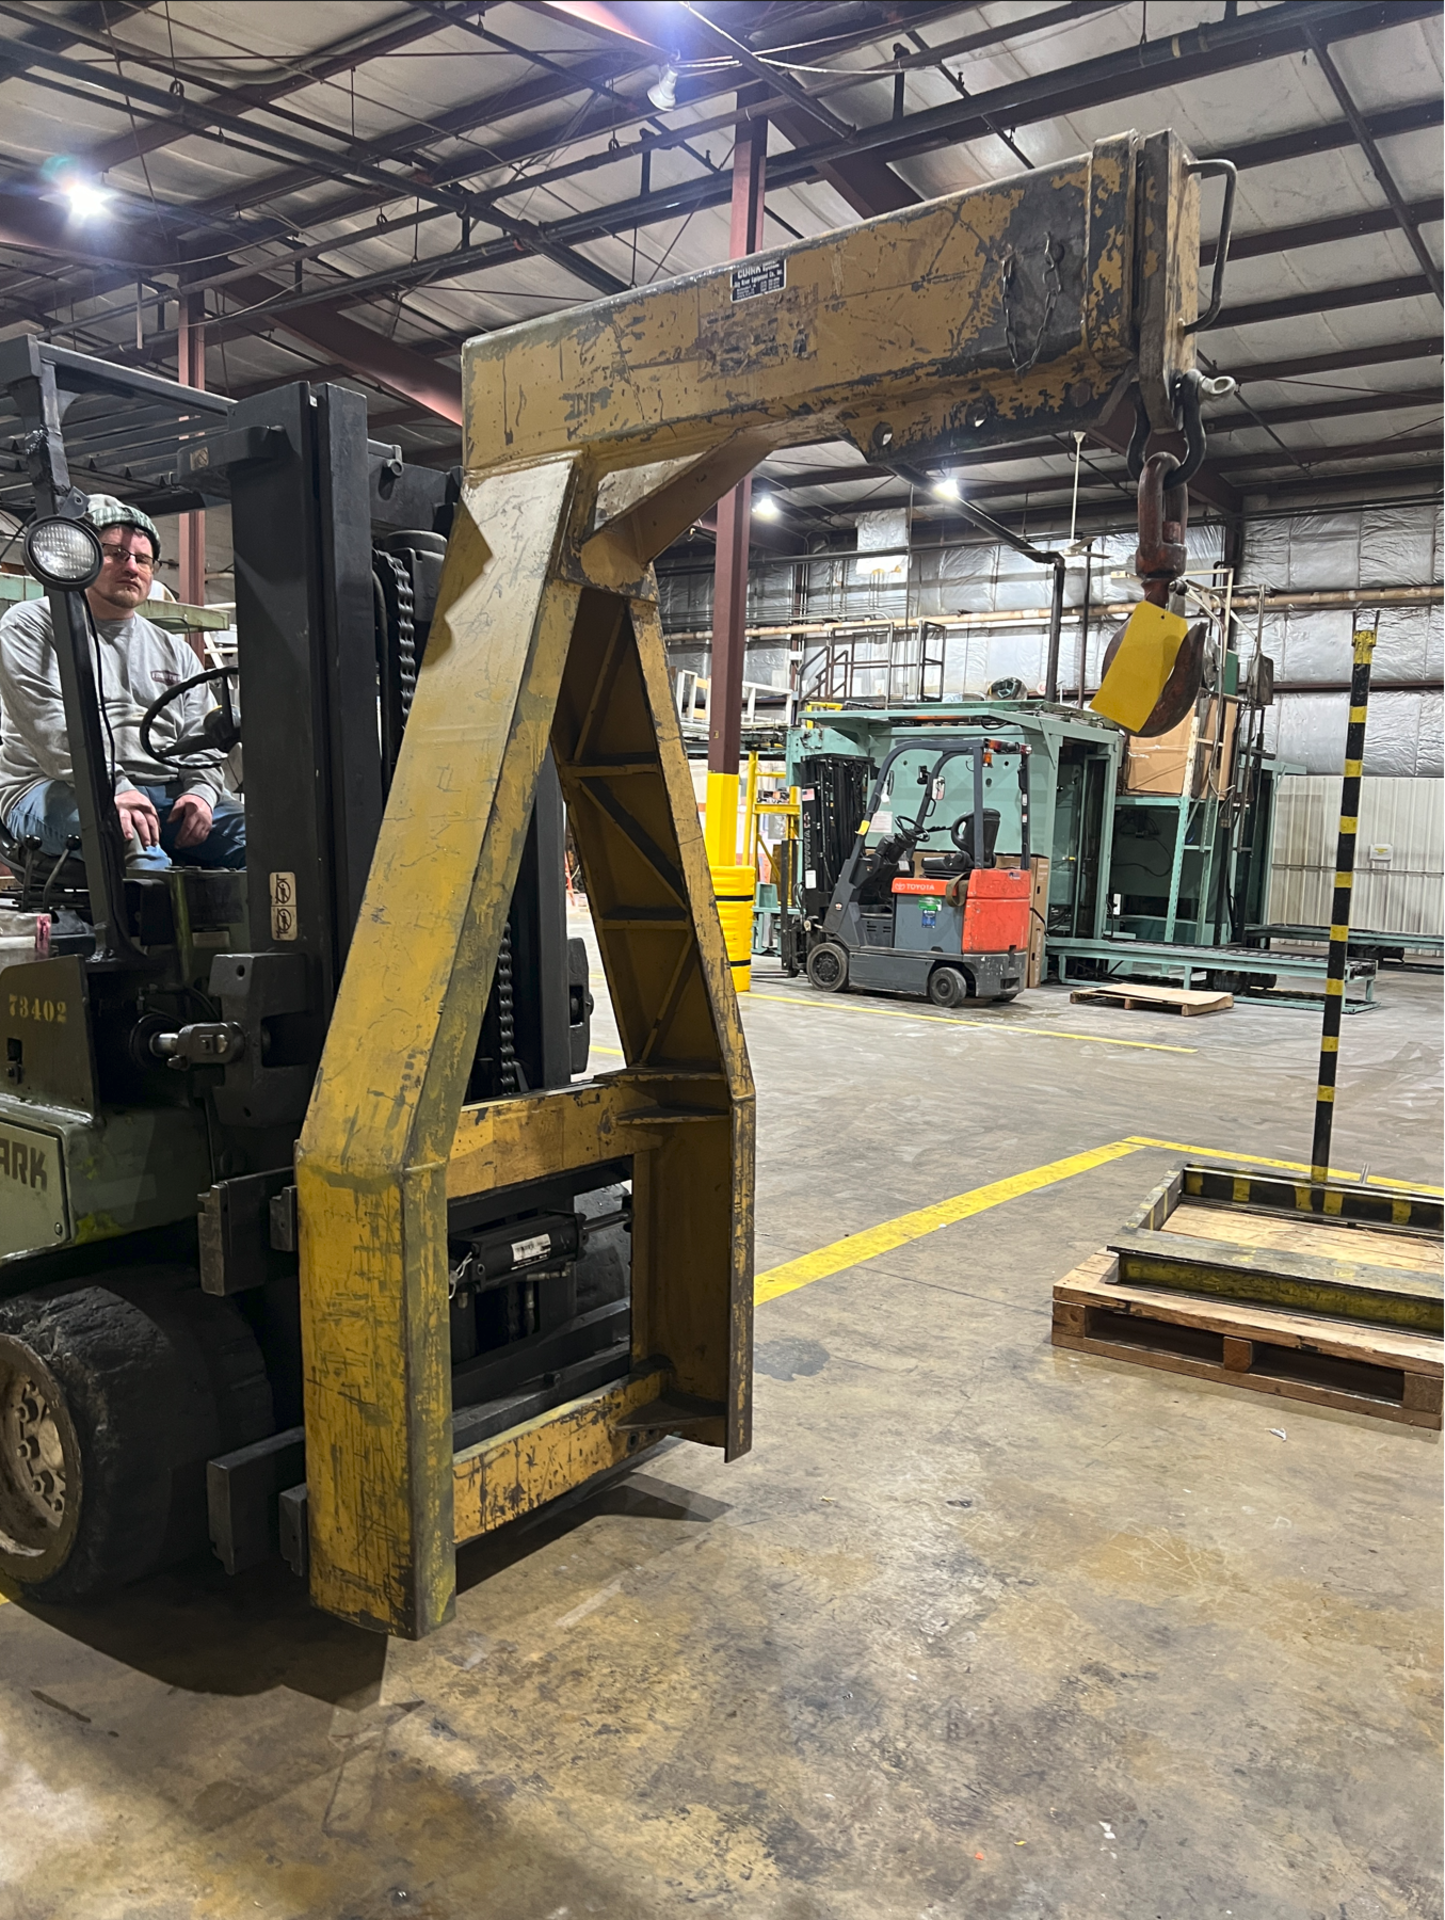 Clark 11,850 LB Capacity Sit-Down Electric Forklift, Model: EC500-120, S/N: E9120-0085-6890FB with - Image 15 of 16